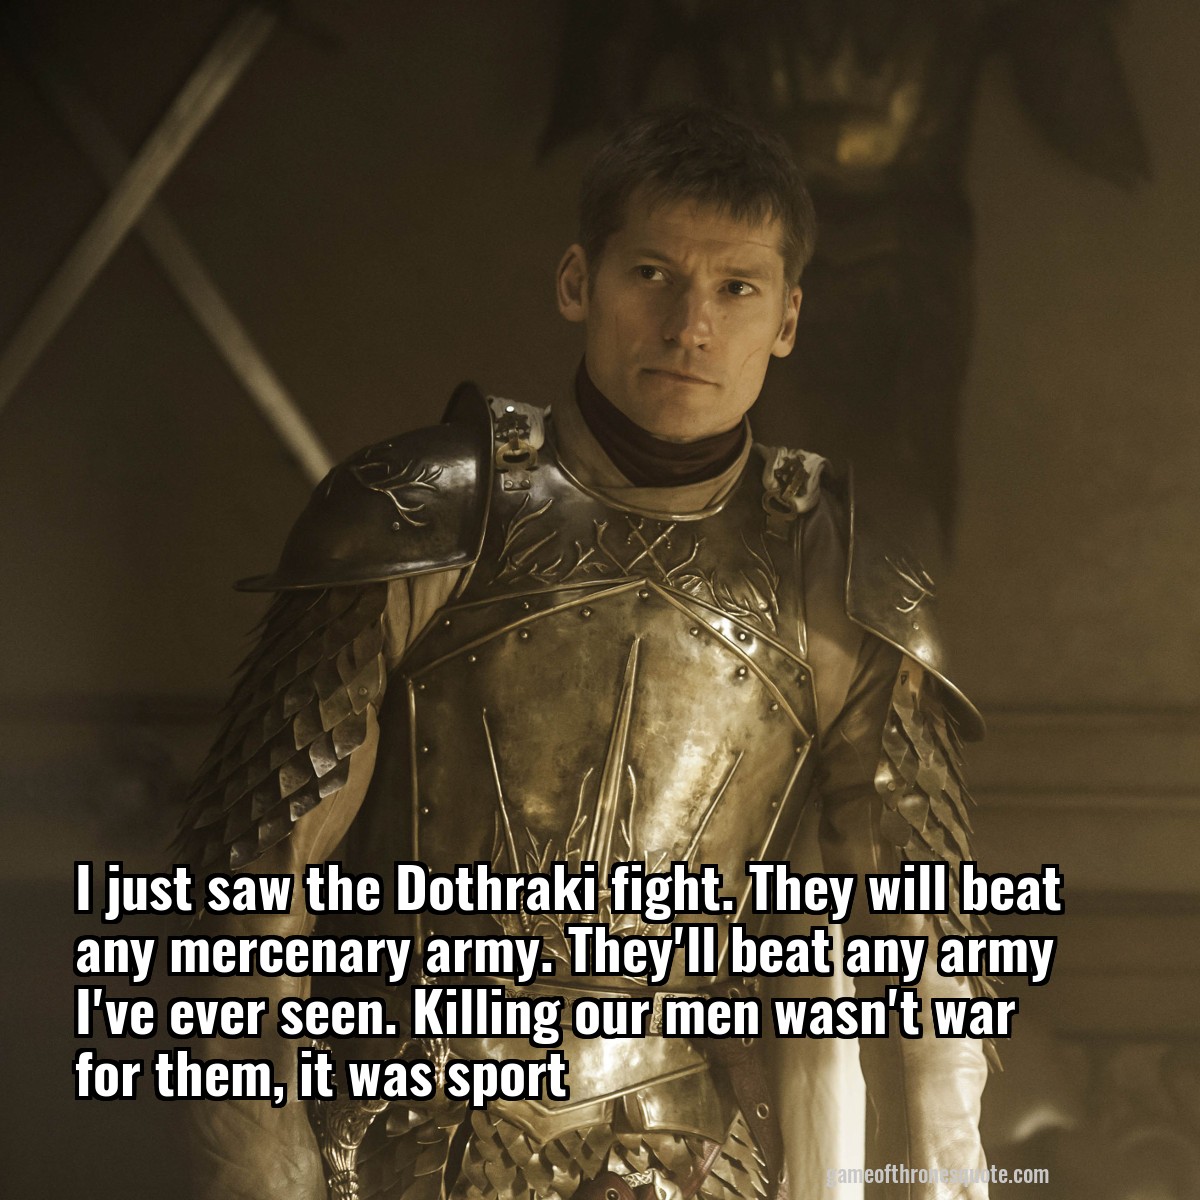 I just saw the Dothraki fight. They will beat any mercenary army. They'll beat any army I've ever seen. Killing our men wasn't war for them, it was sport